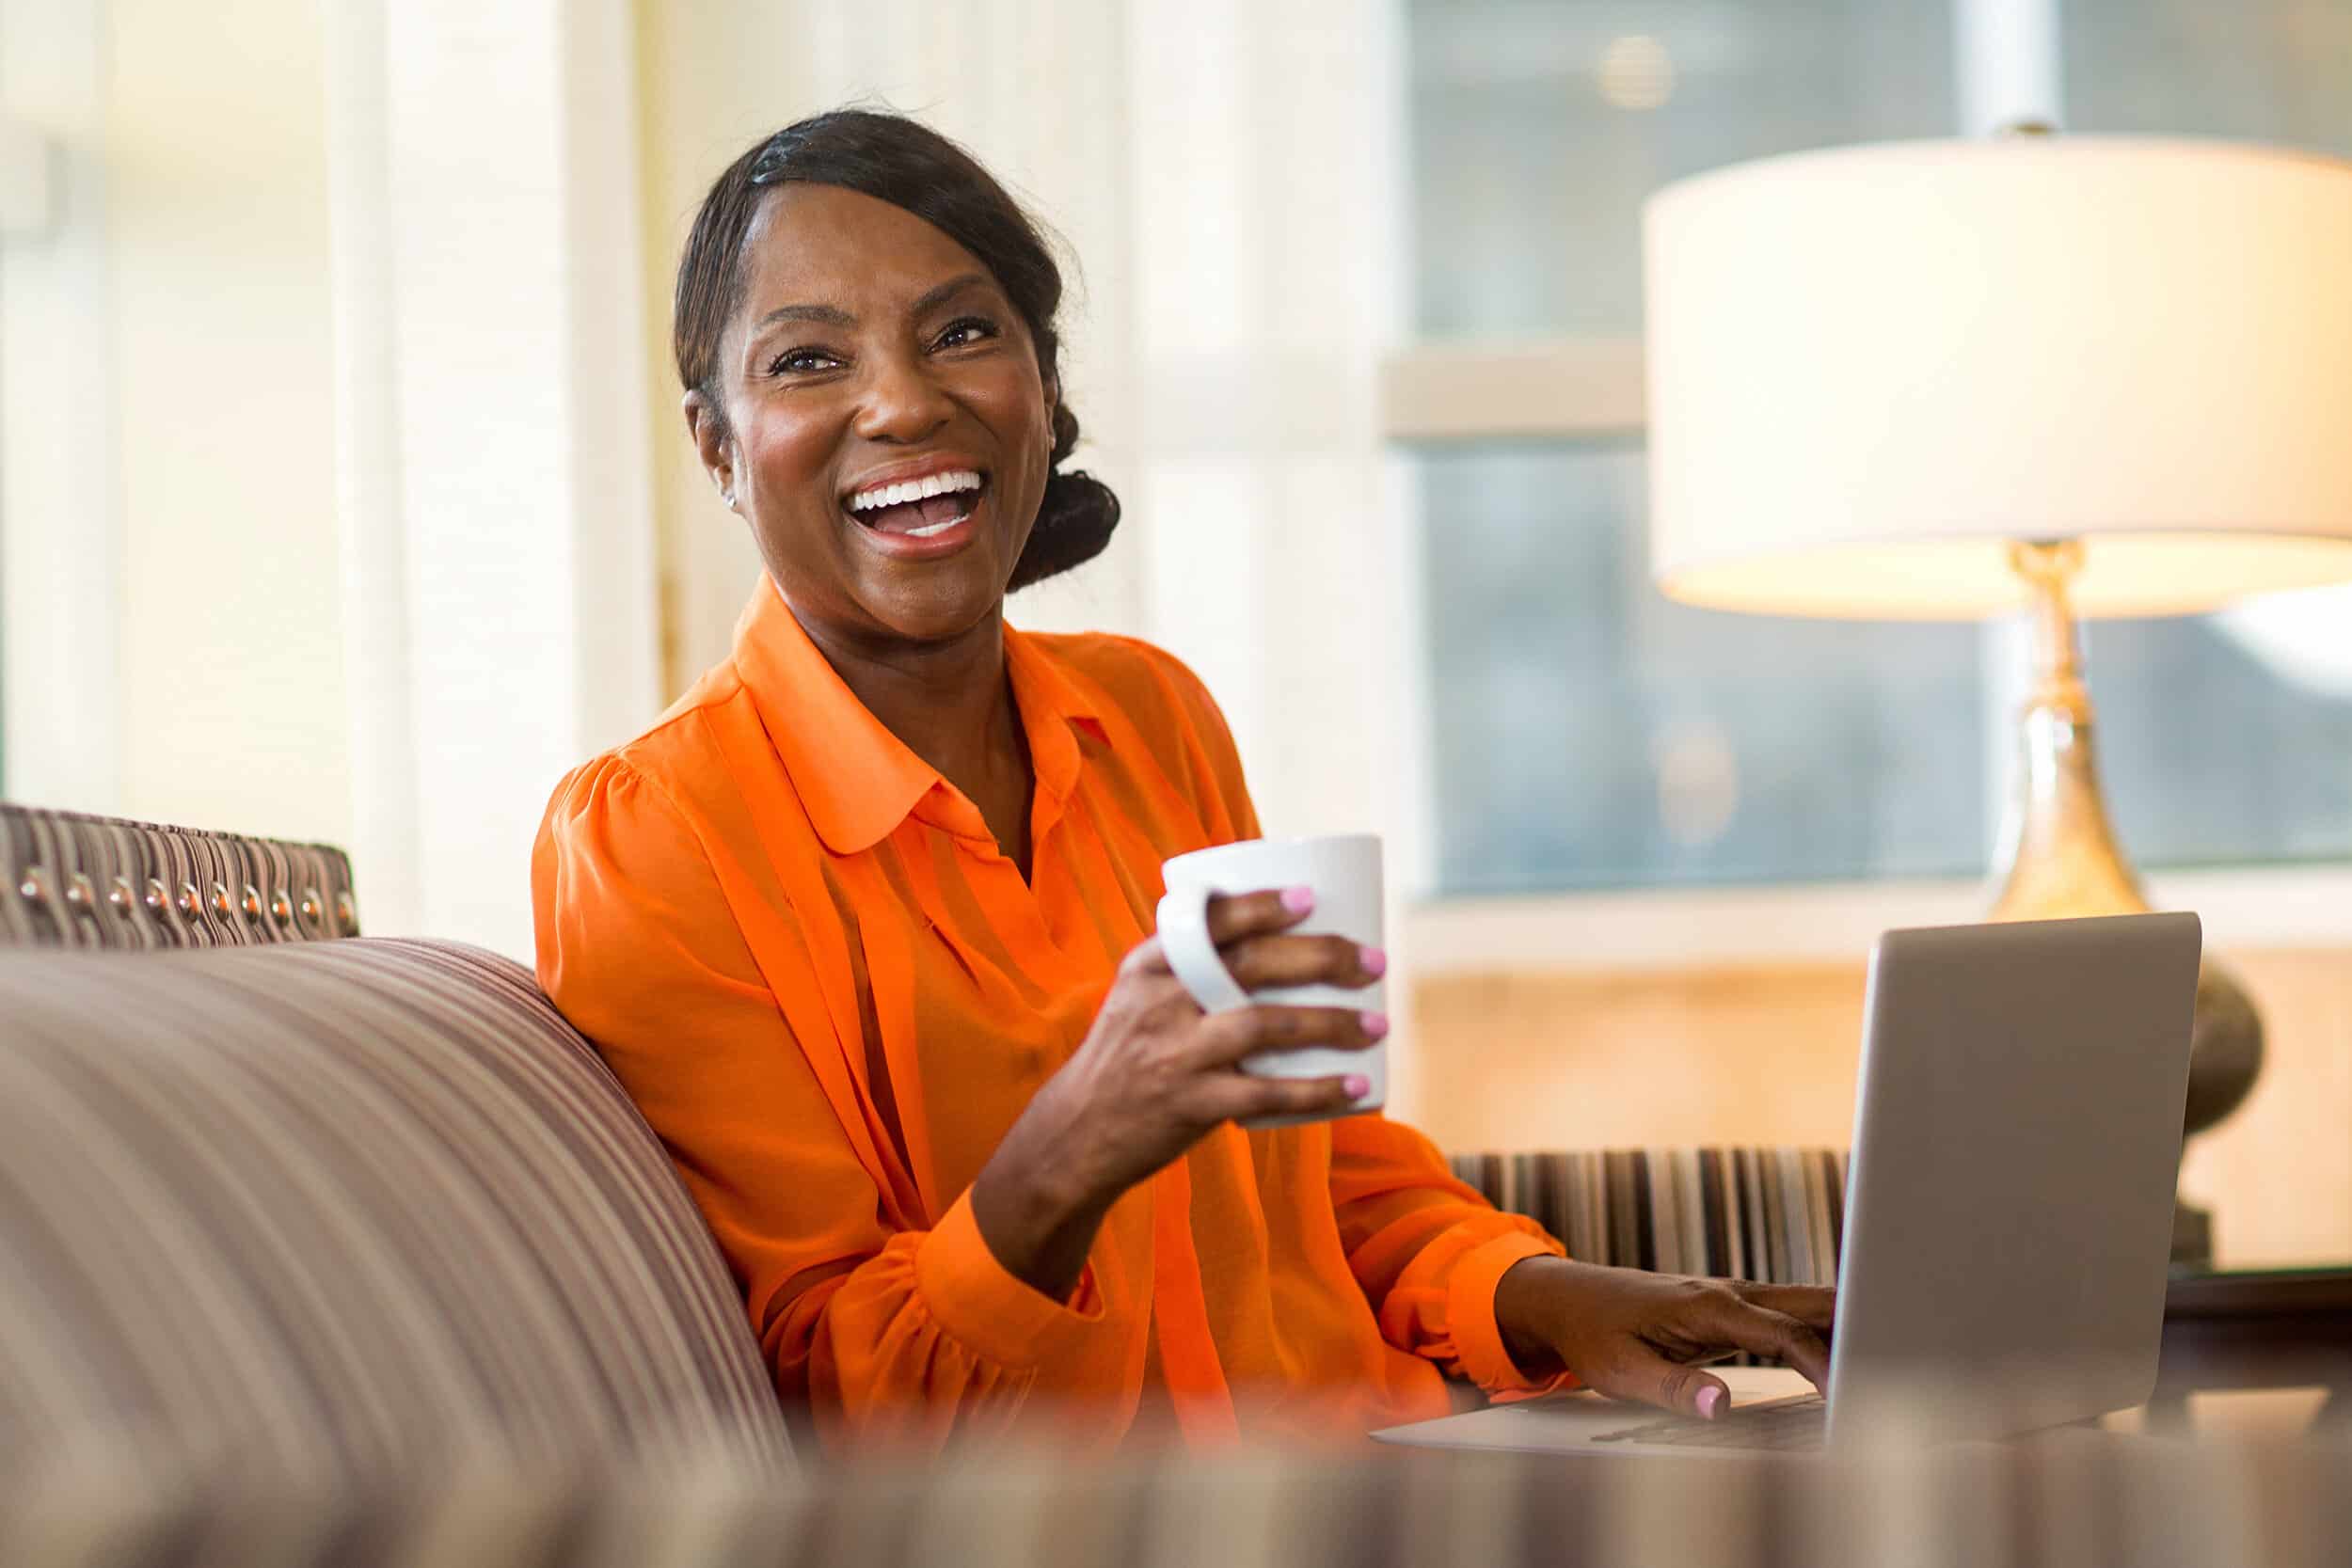 Joyful woman working from home in her computer while enjoying a cup of coffee